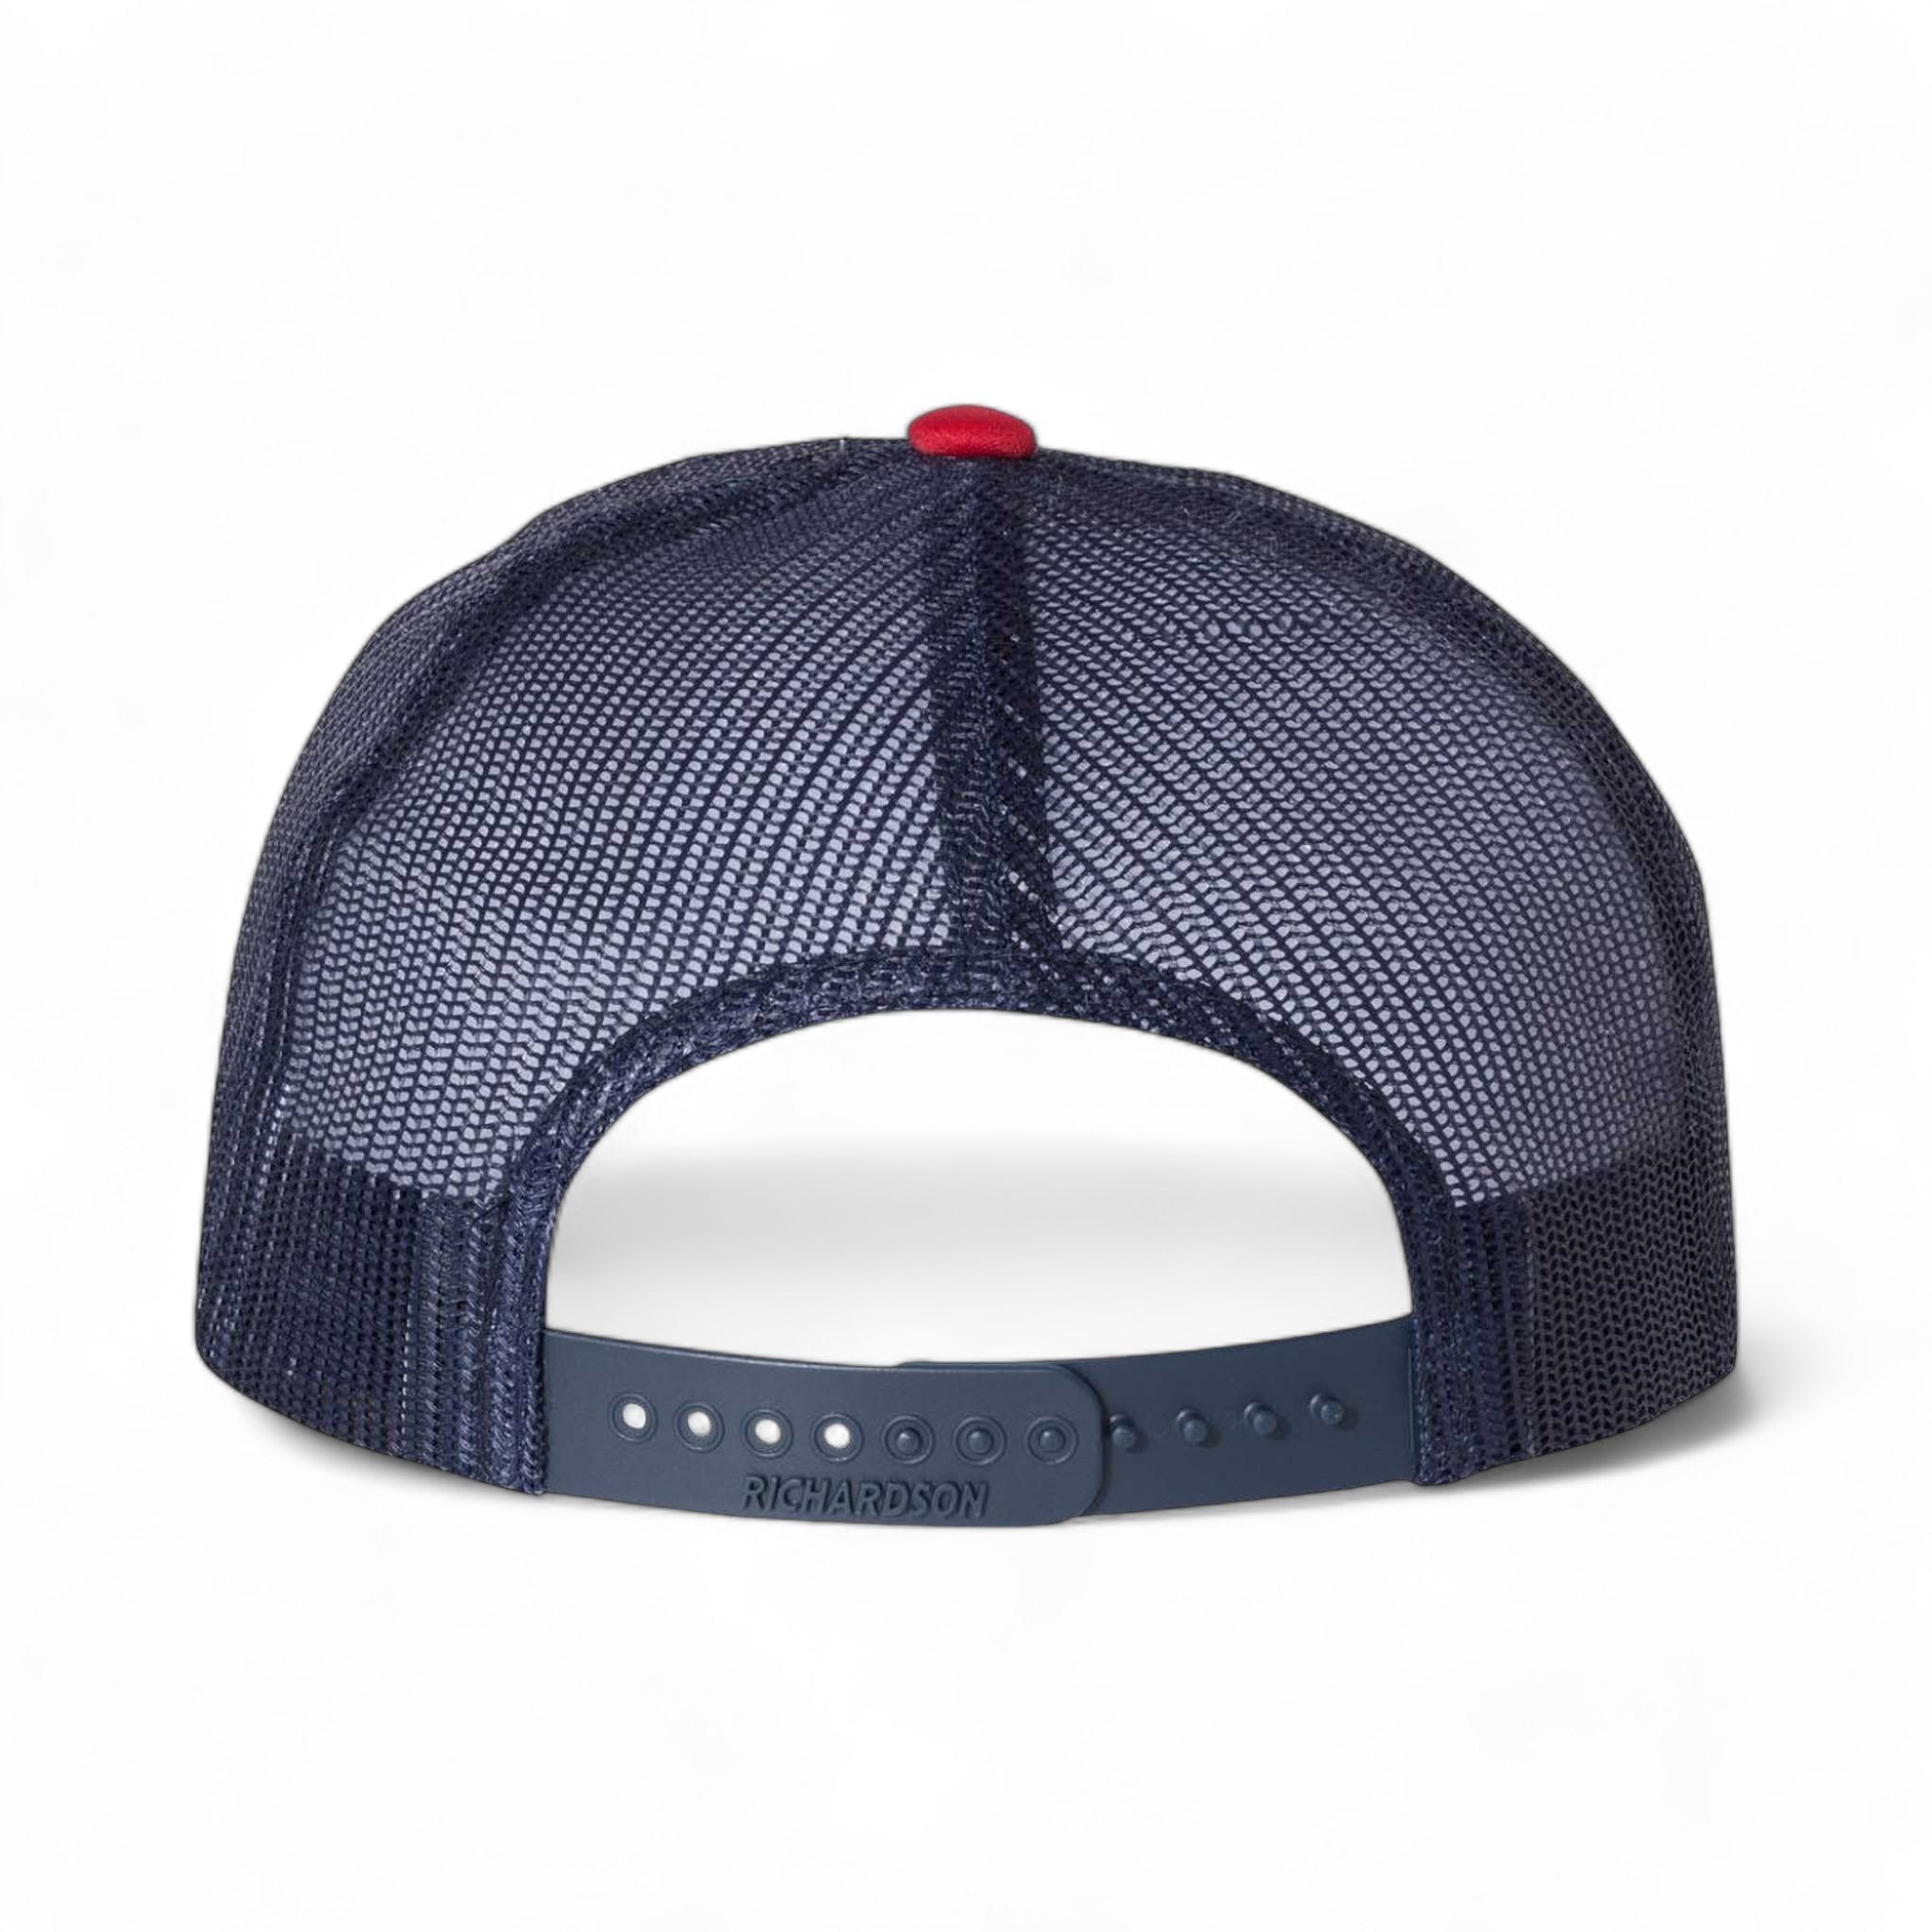 Back view of Richardson 113 custom hat in white, navy and red